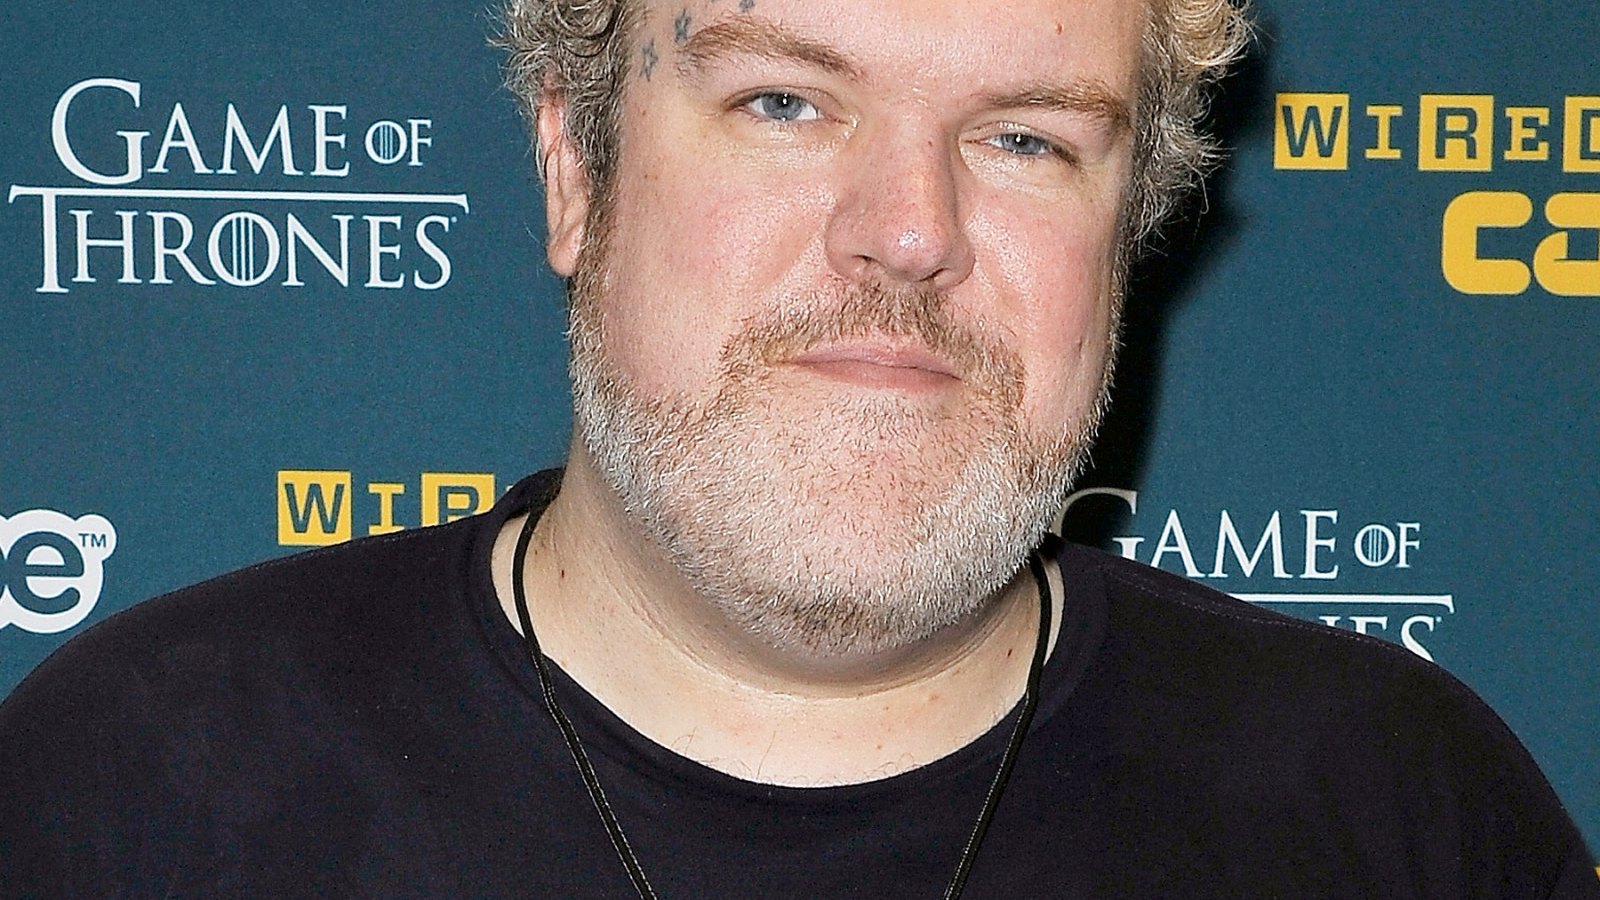 Kristian Nairn attends an event on July 12, 2012